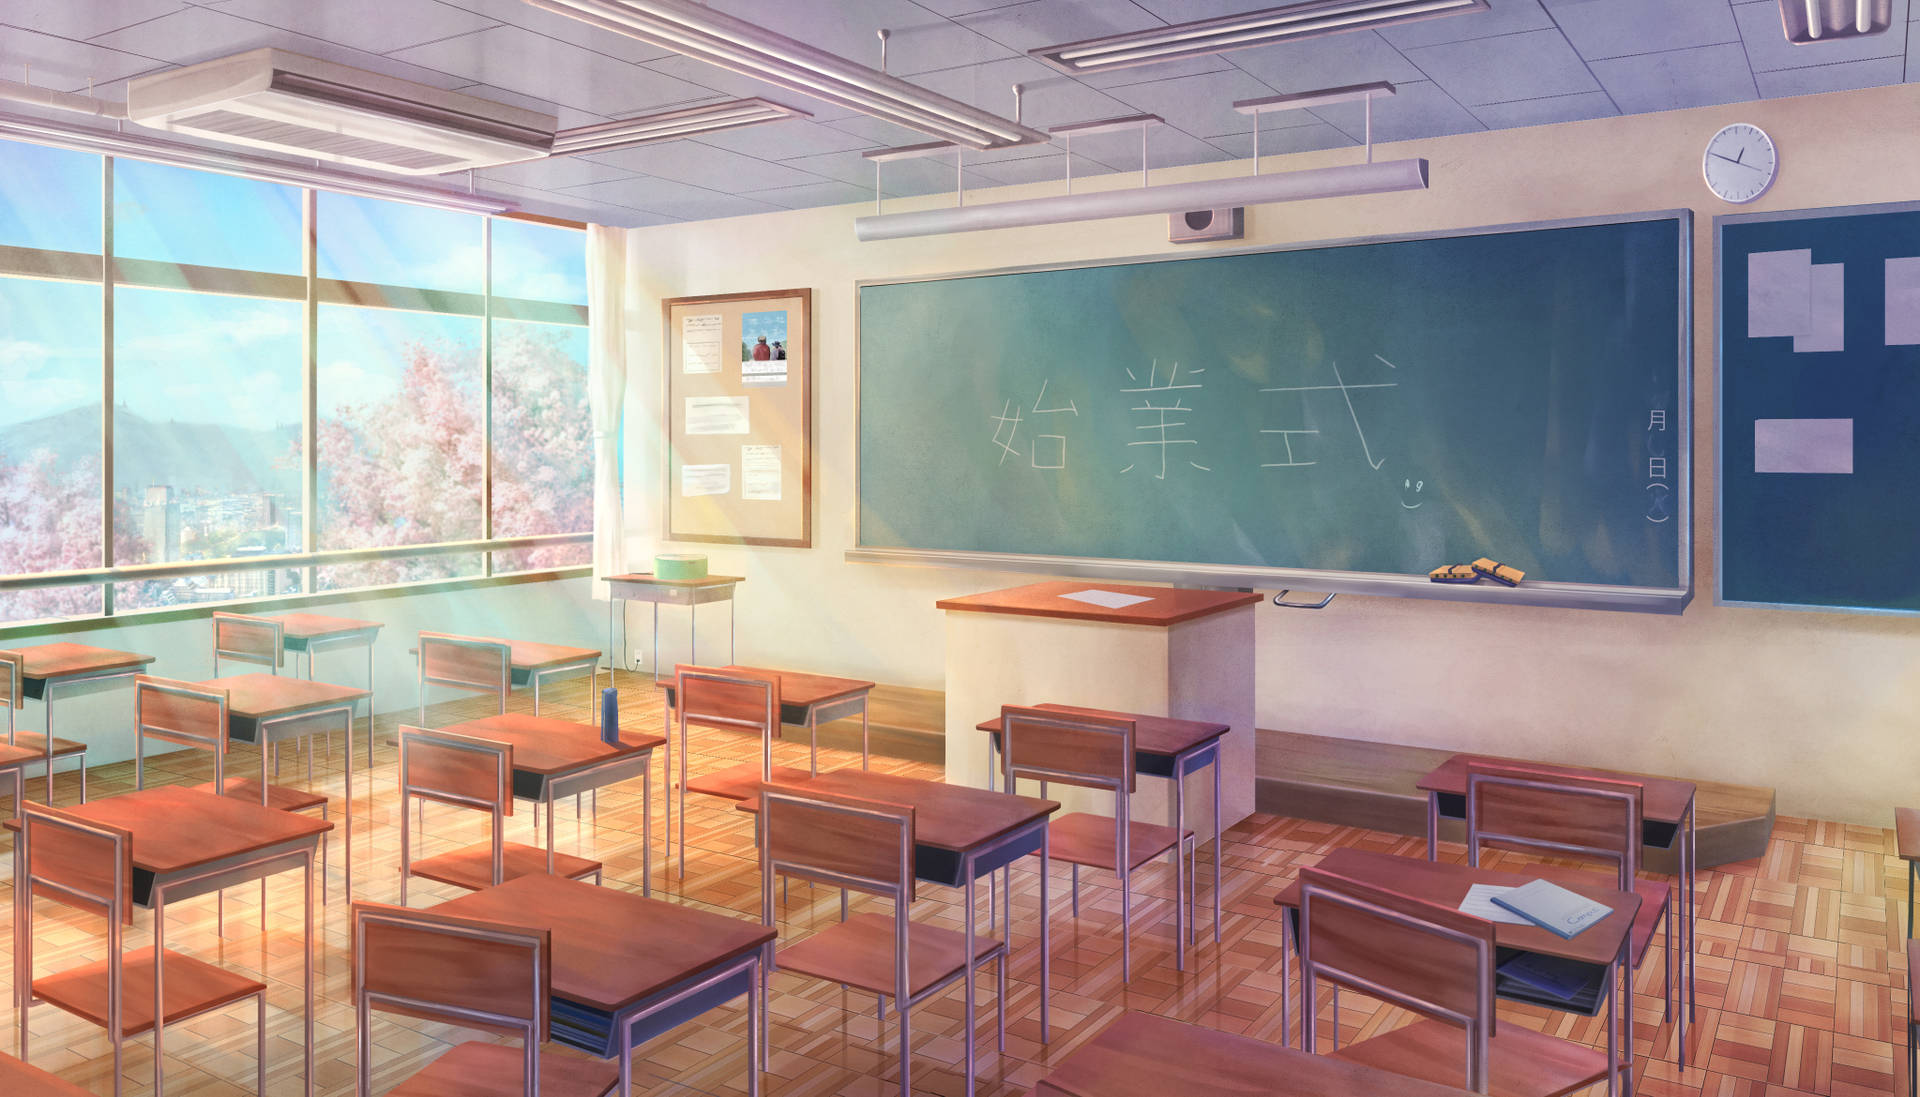 Free Classroom Wallpaper Downloads, [100+] Classroom Wallpapers for FREE |  